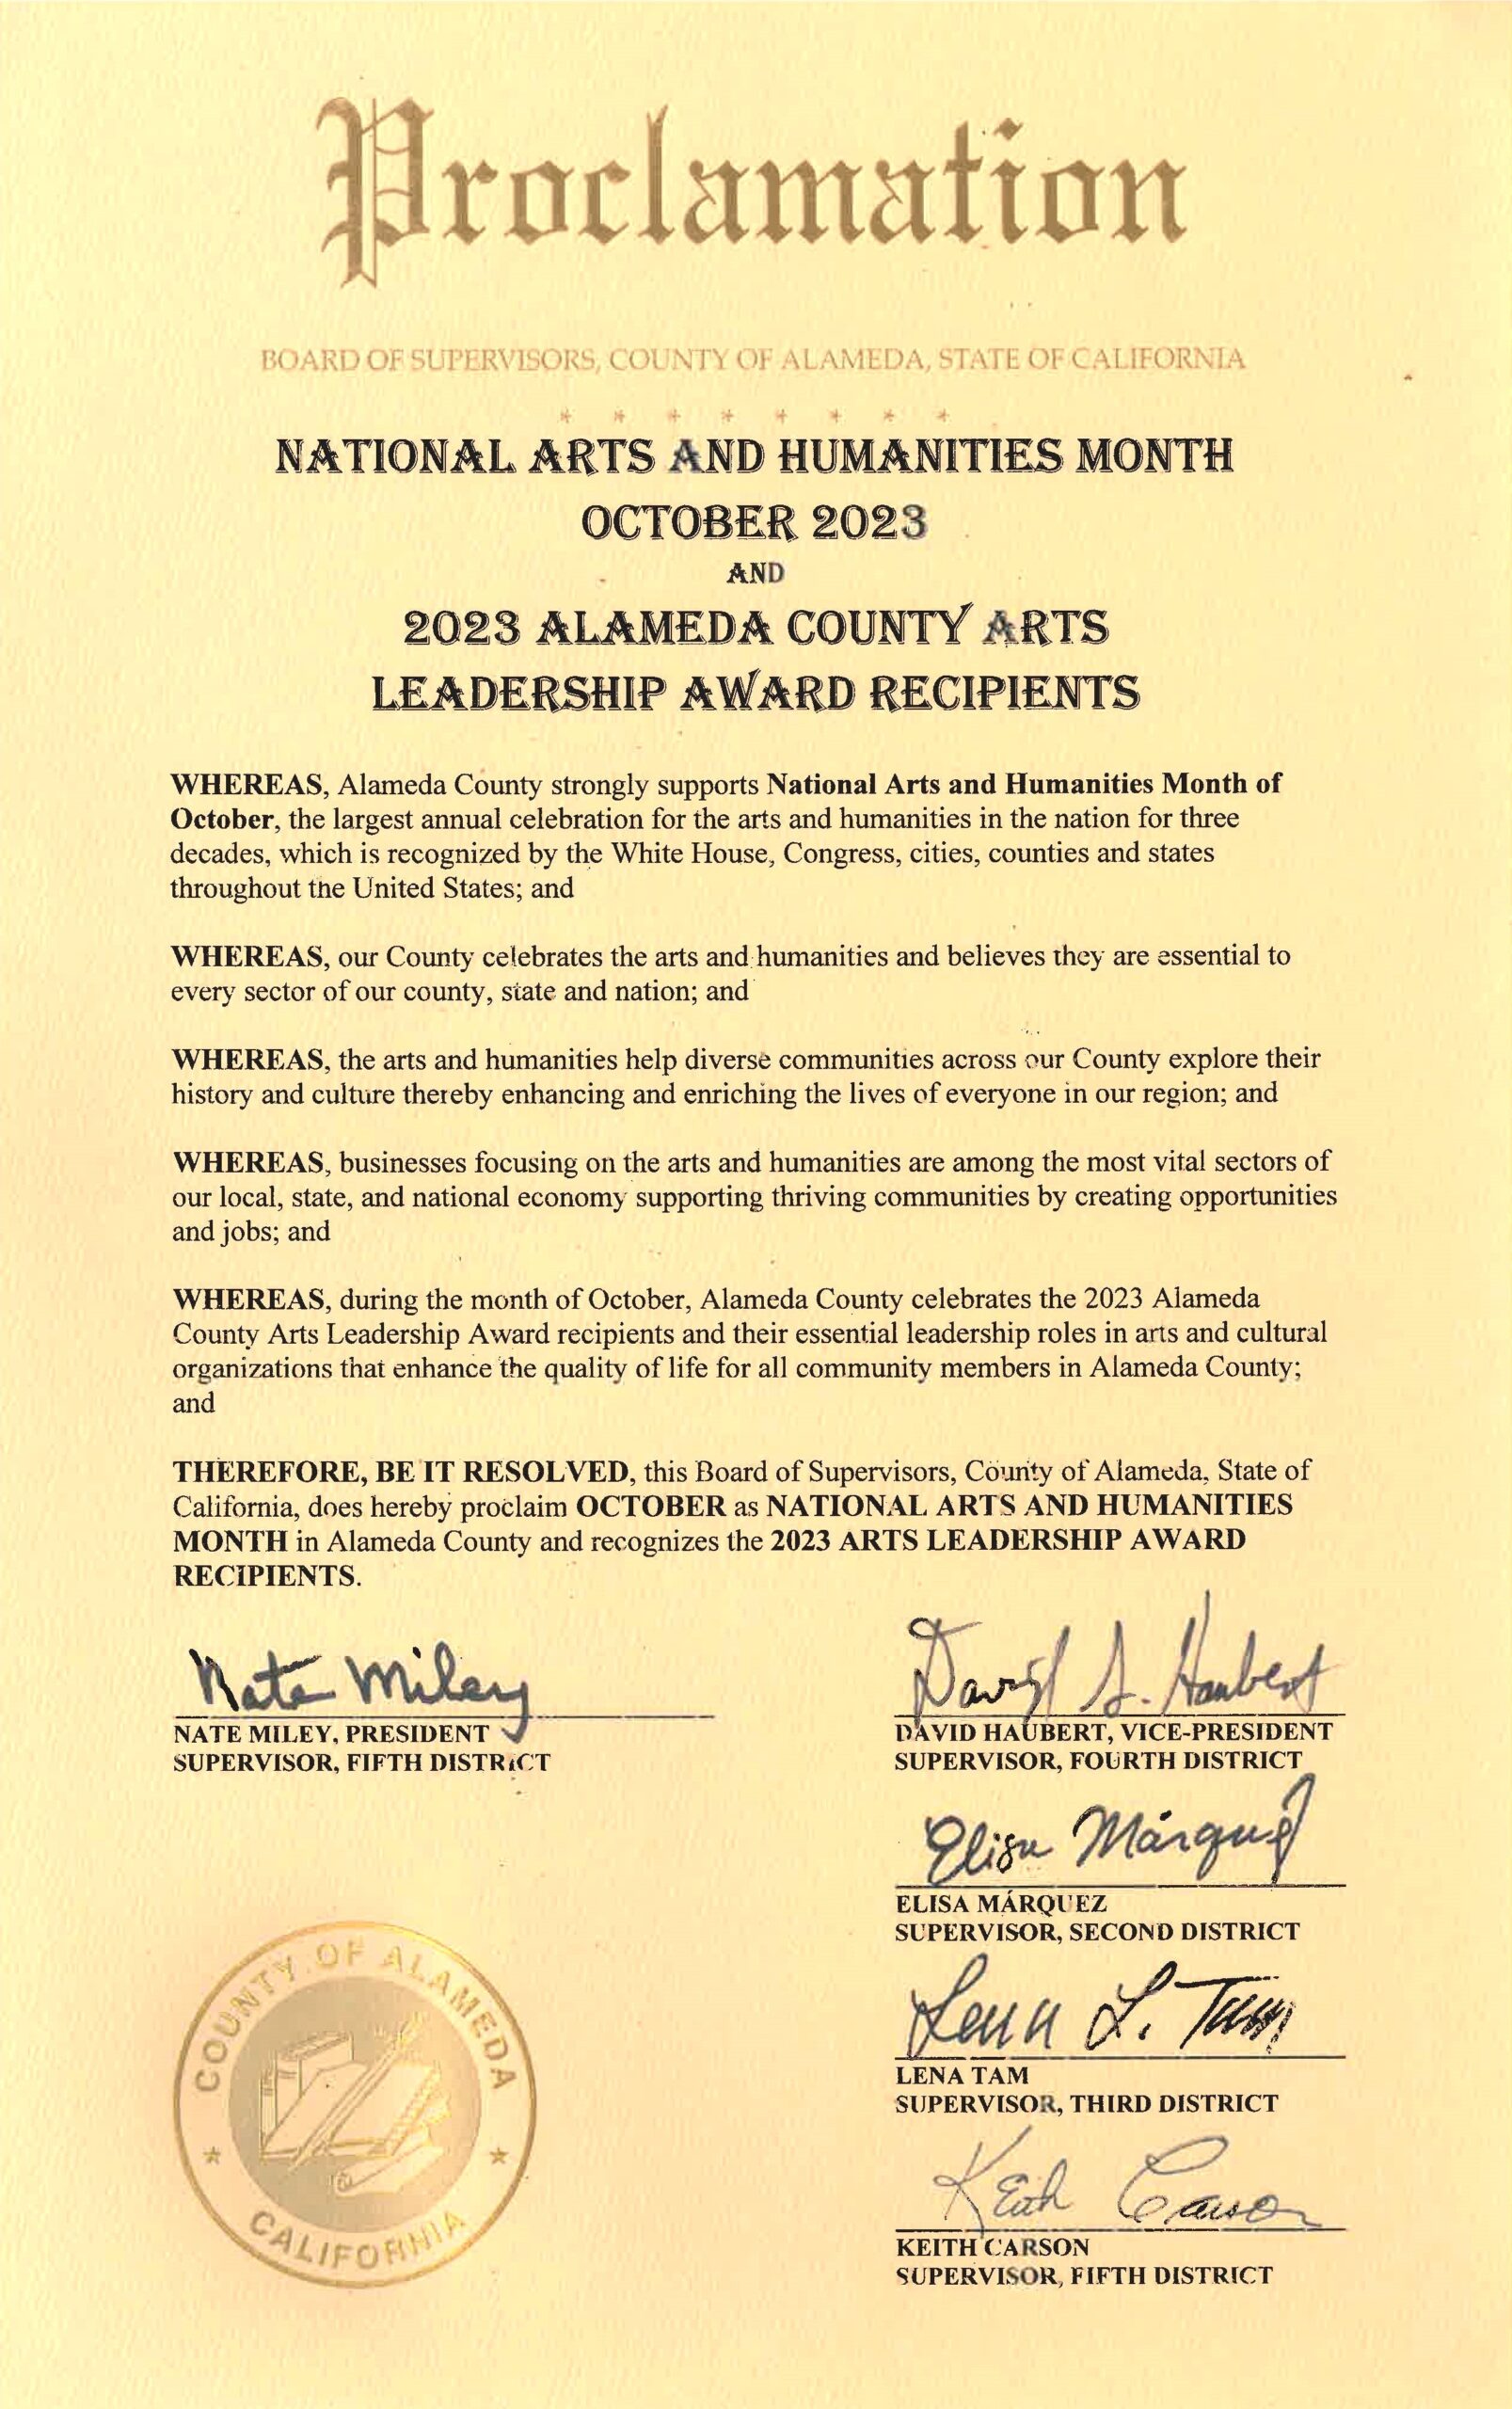 Photograph of Proclamation by Alameda County Board of Supervisors